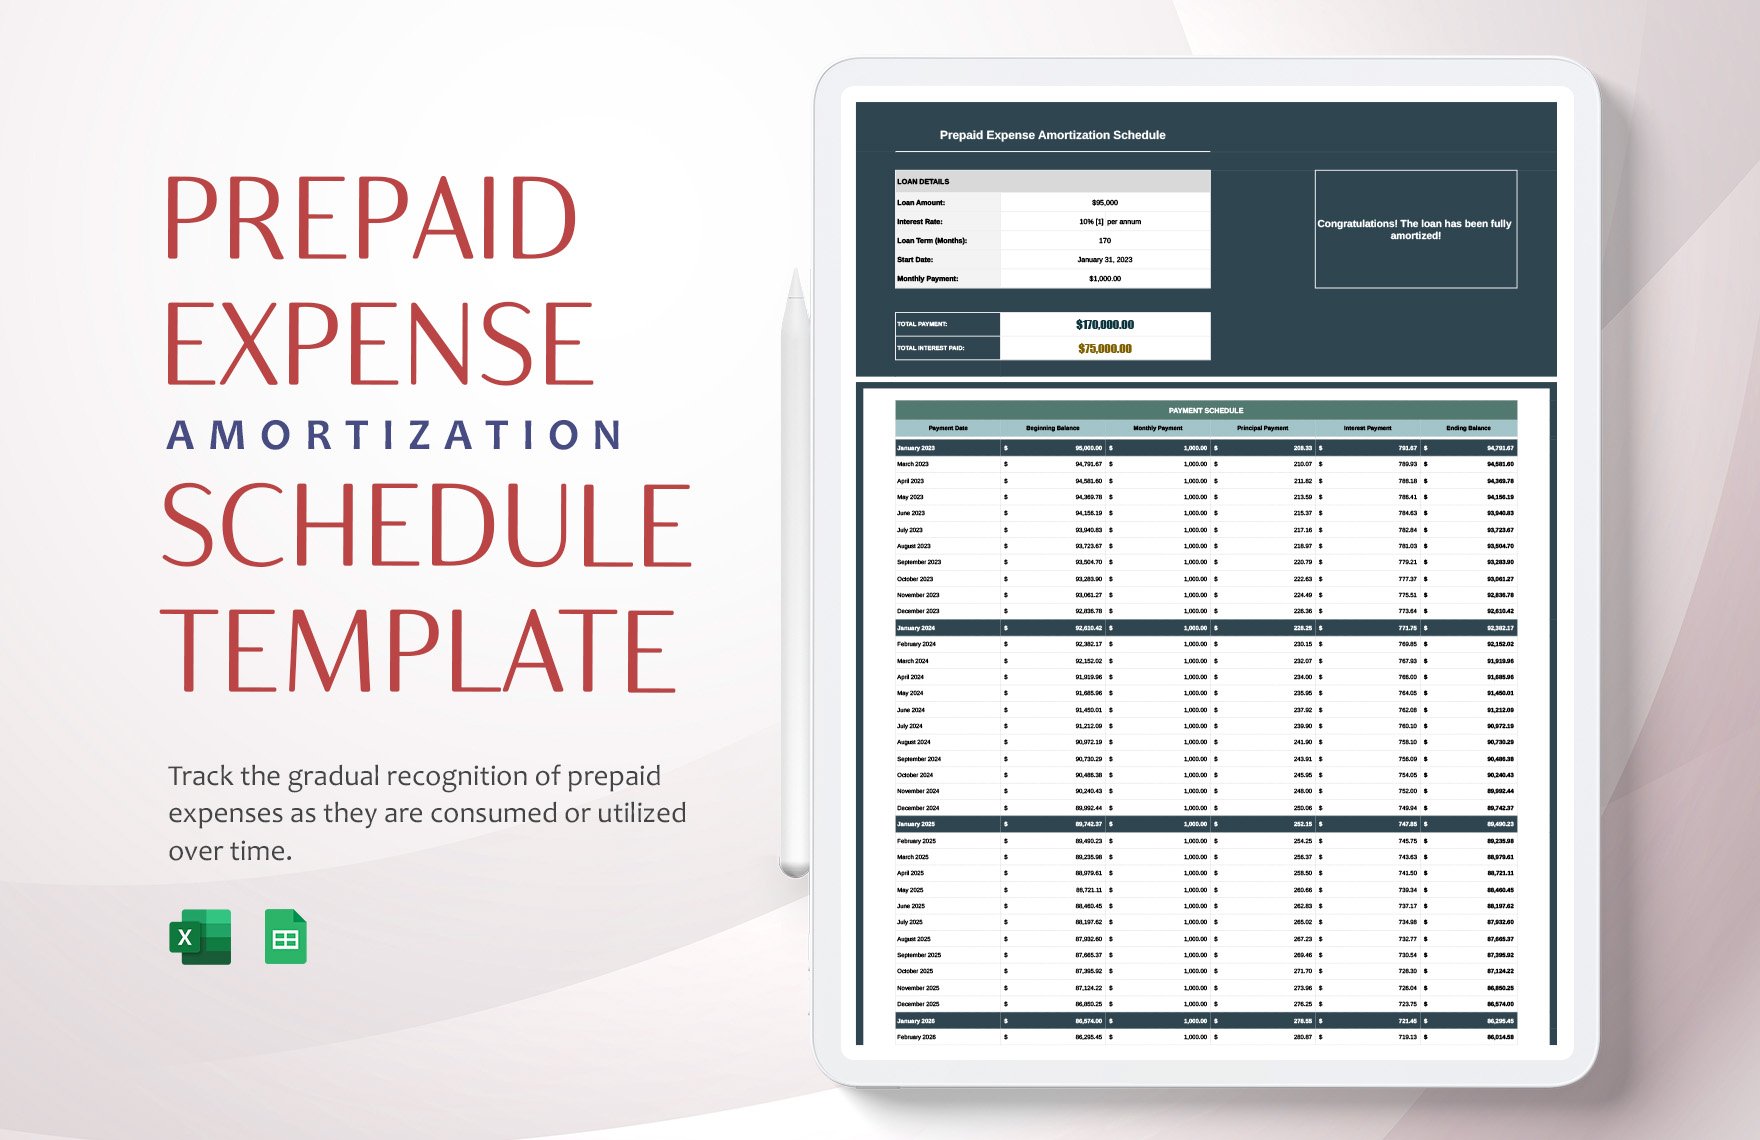 Prepaid Expense Amortization Schedule Template in Excel, Google Sheets